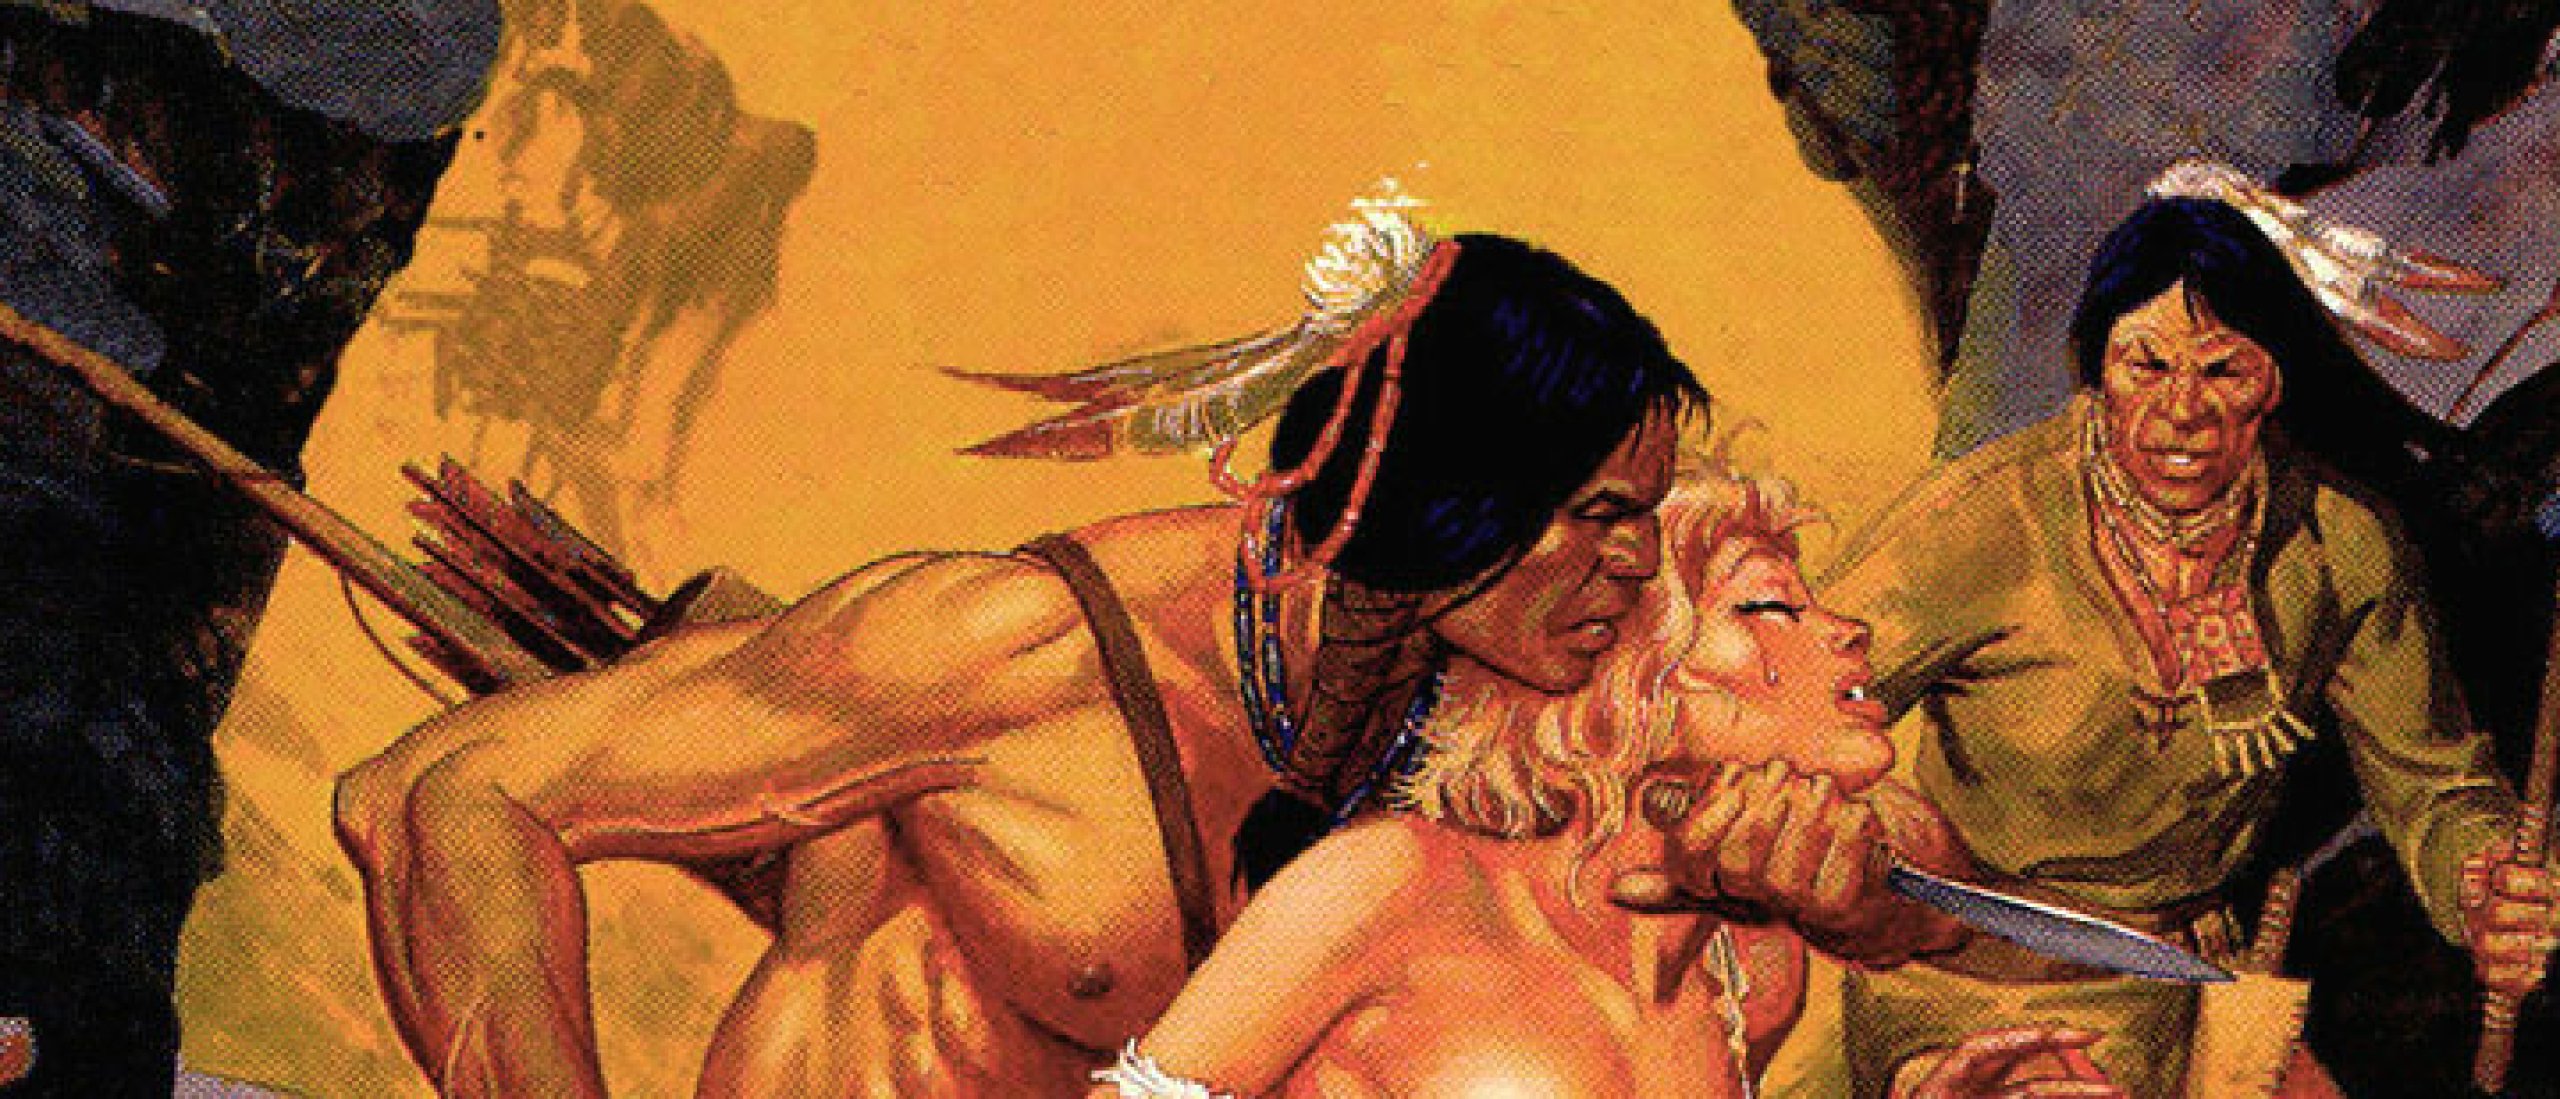 24 Sexy Pulp Covers of the Mexican Comic Book Illustrator Rafael Gallur